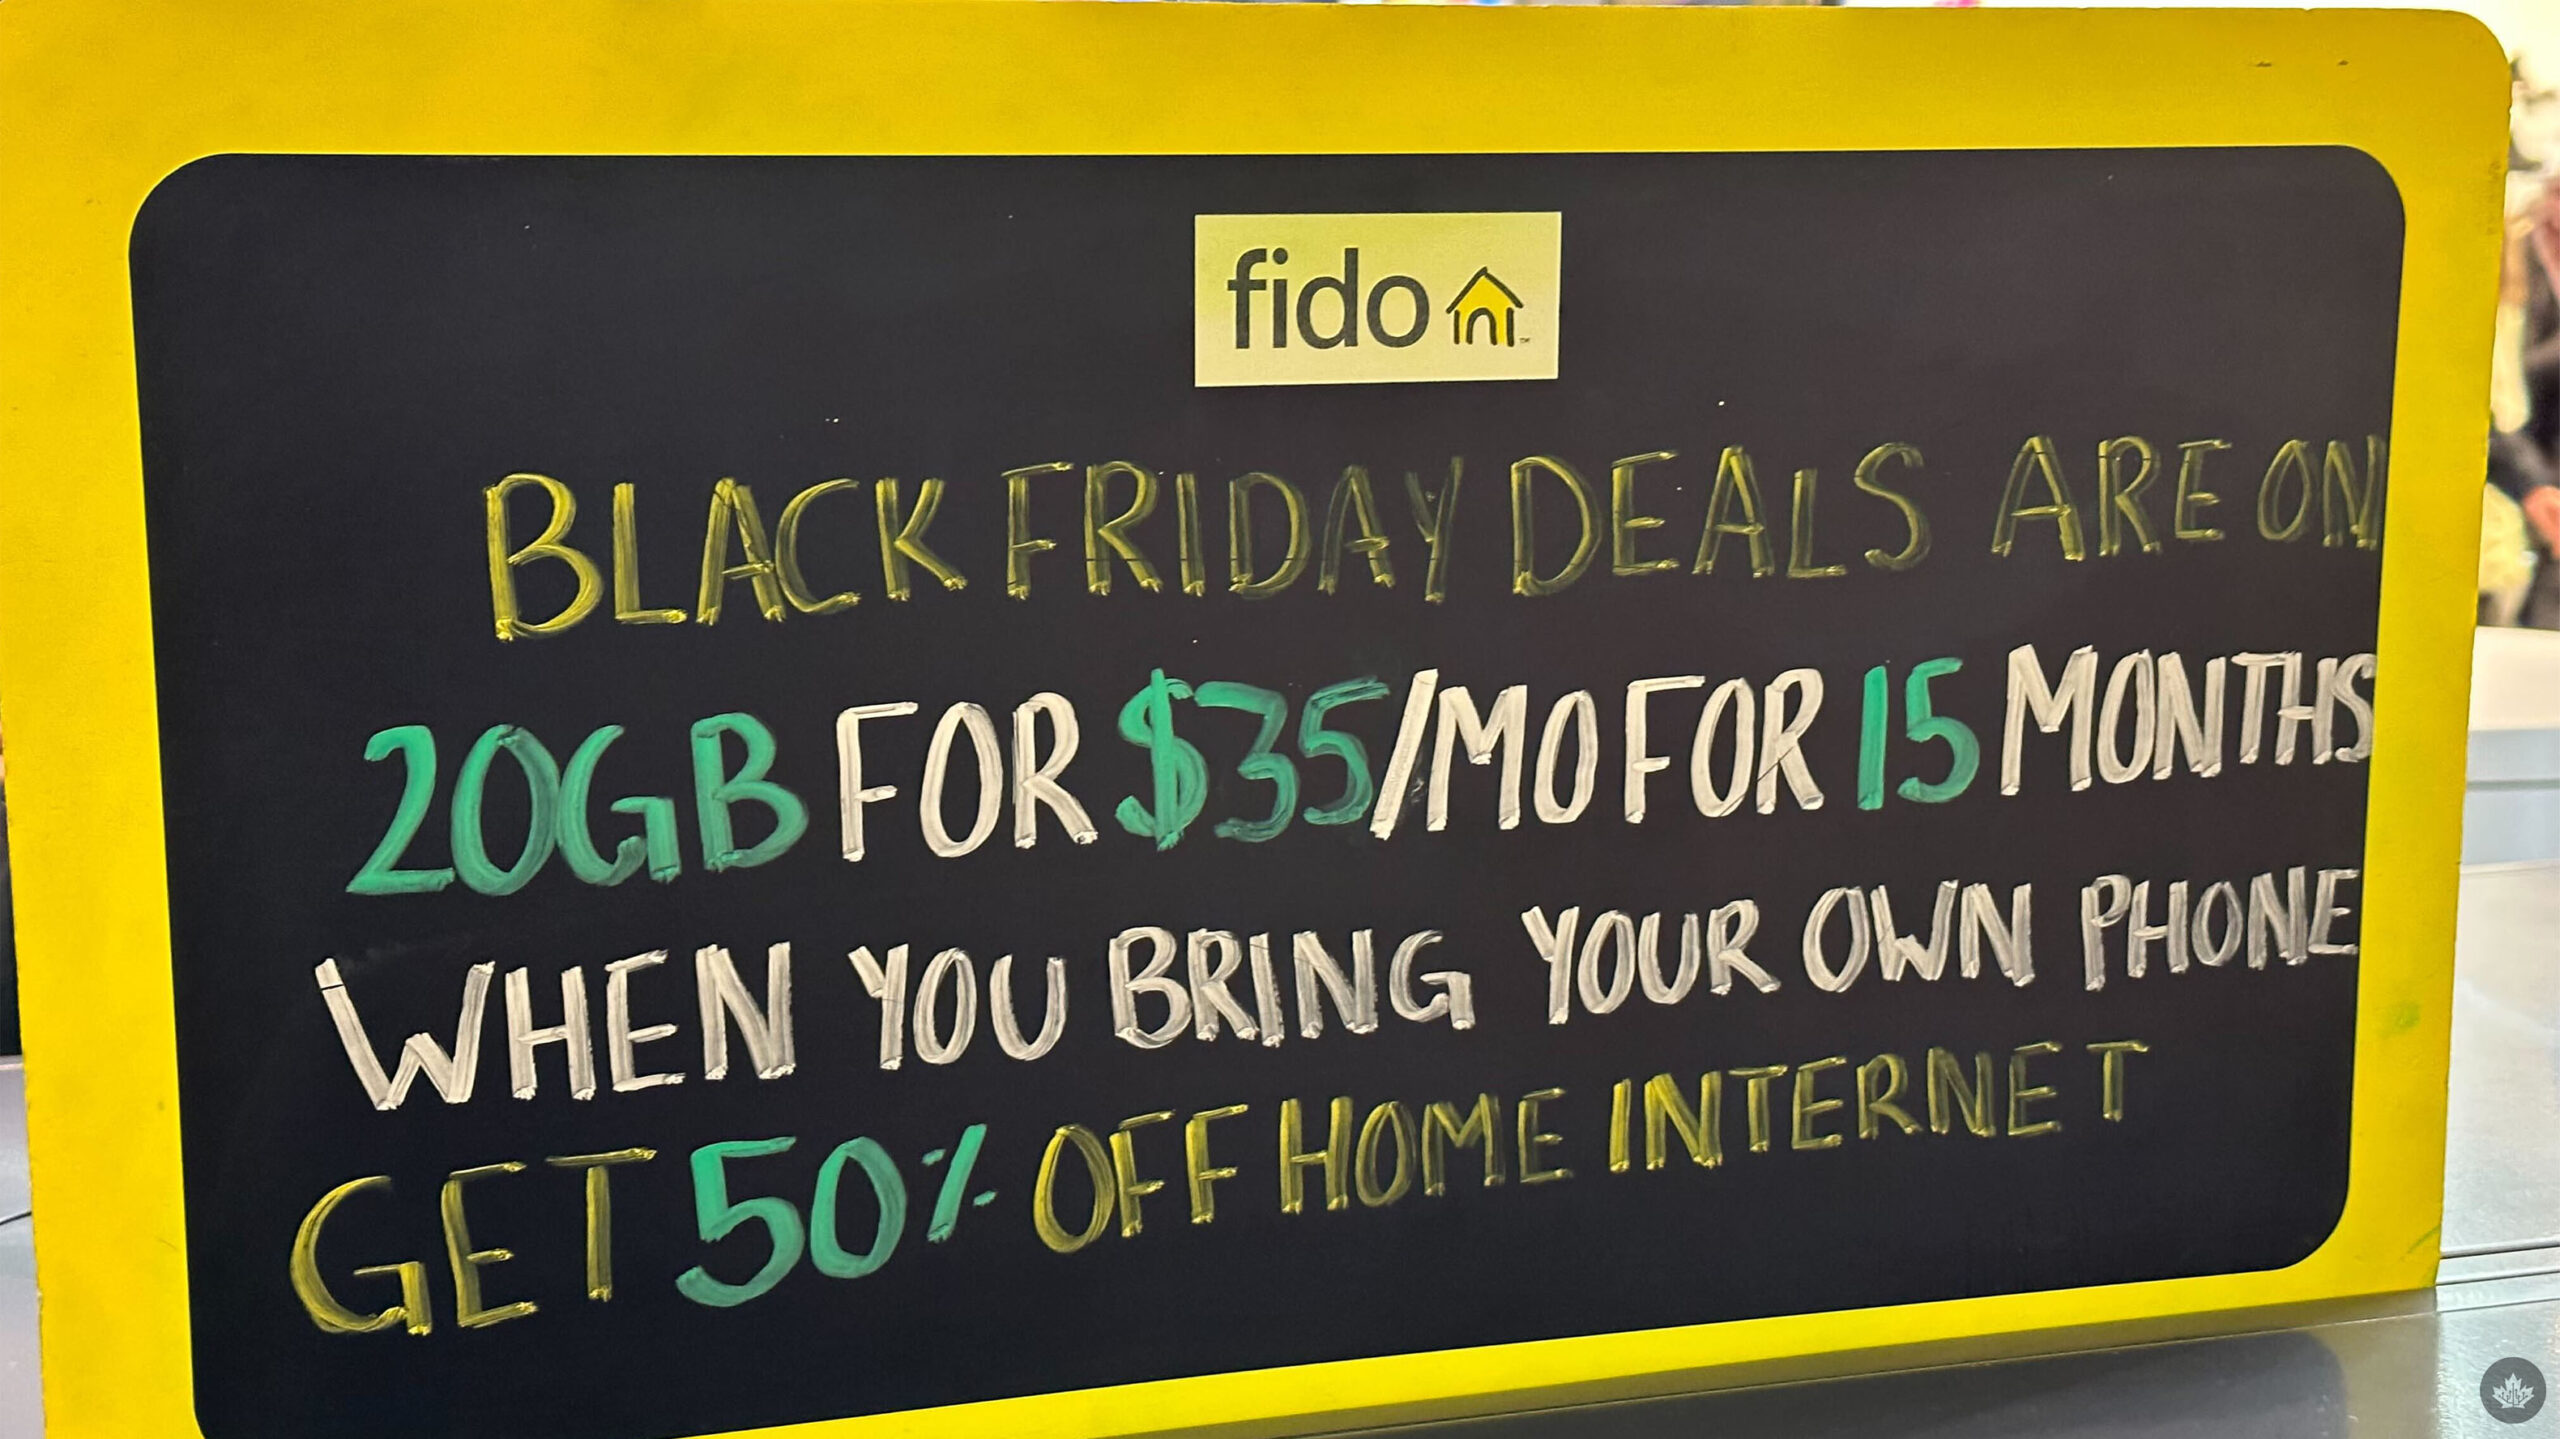 Canadian wireless providers’ Black Friday plans haven’t impressed me yet